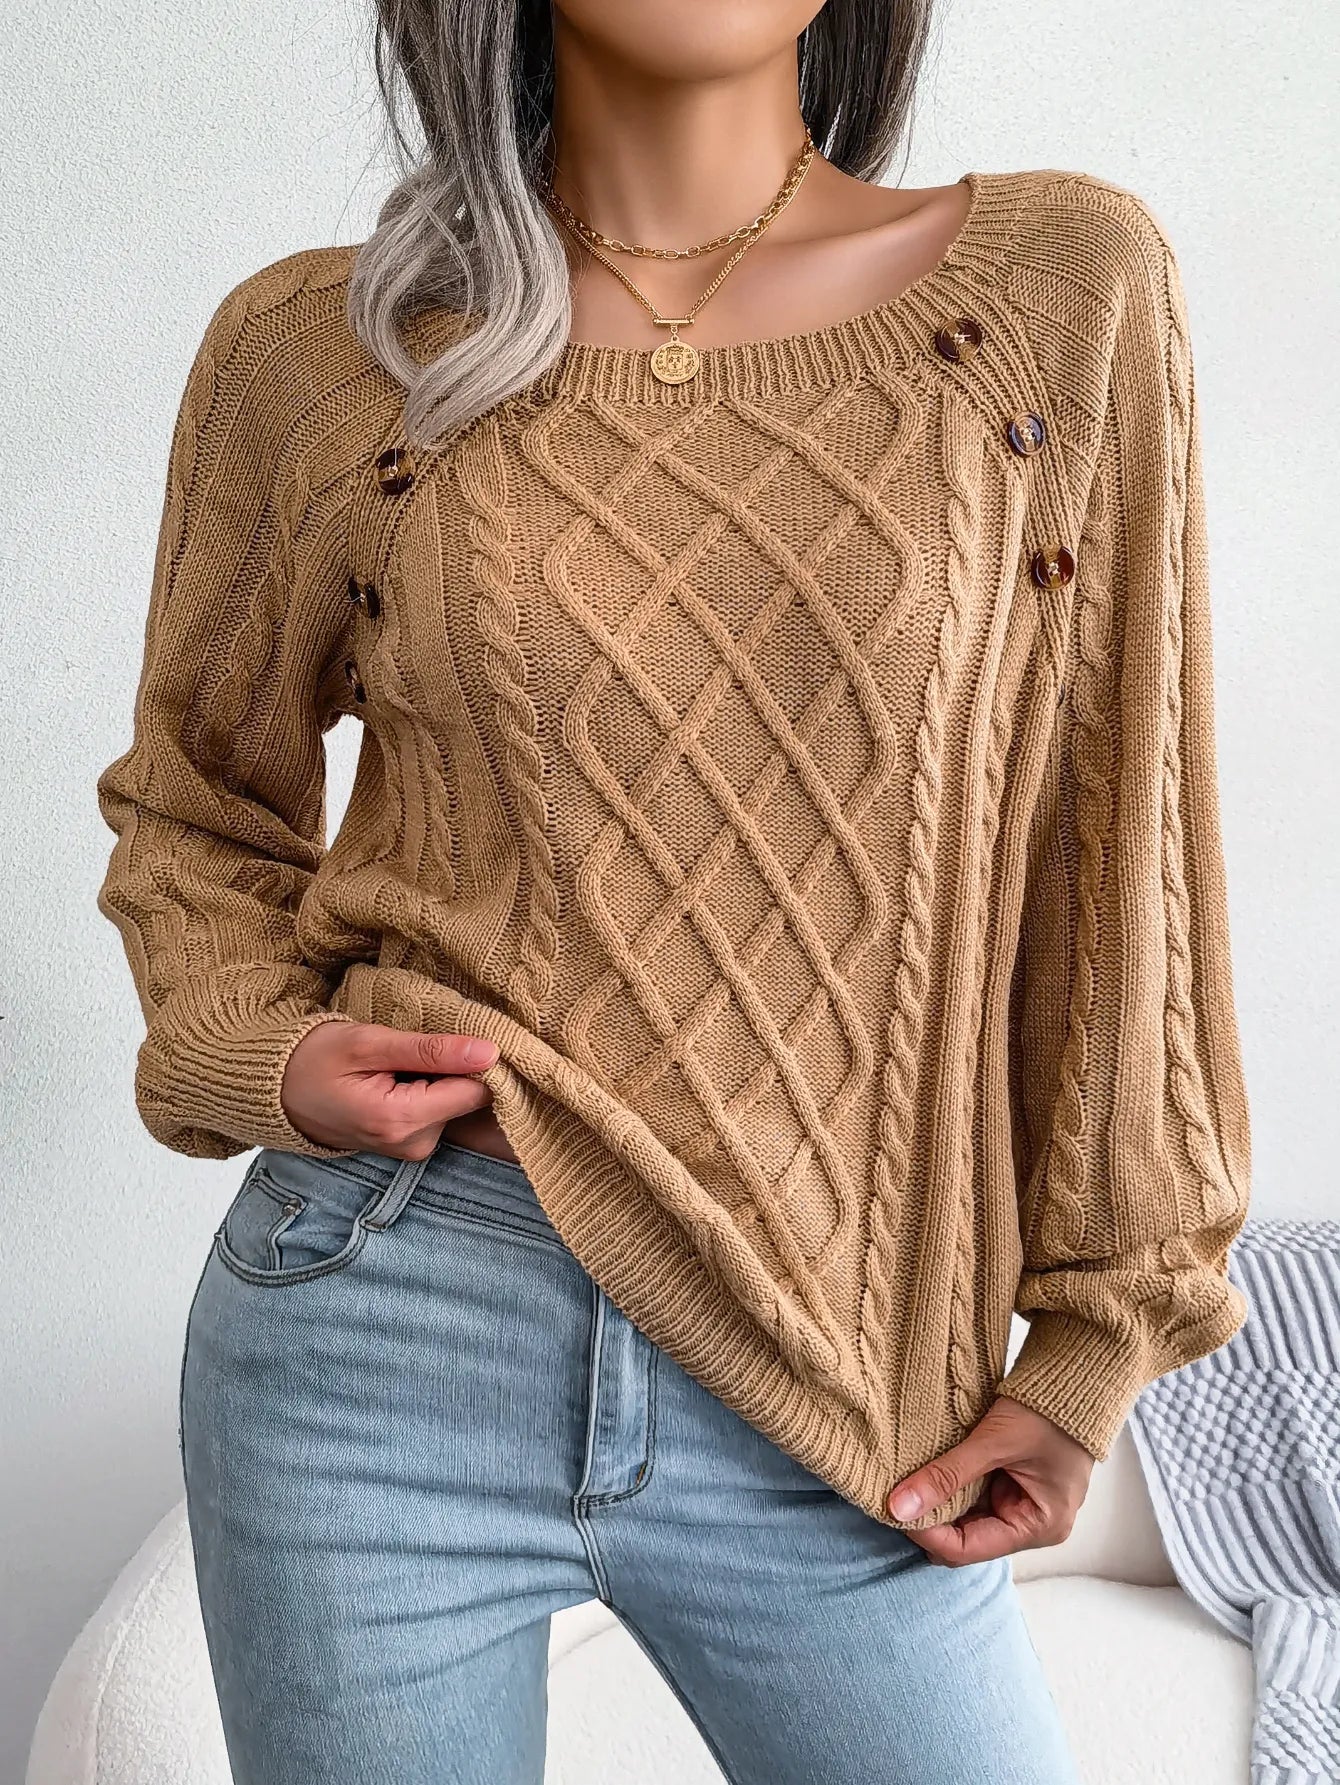 lovwvol Women Casual Square Collar Buttons Long Sleeve Knitted Pullovers And Sweaters For Autumn Winter